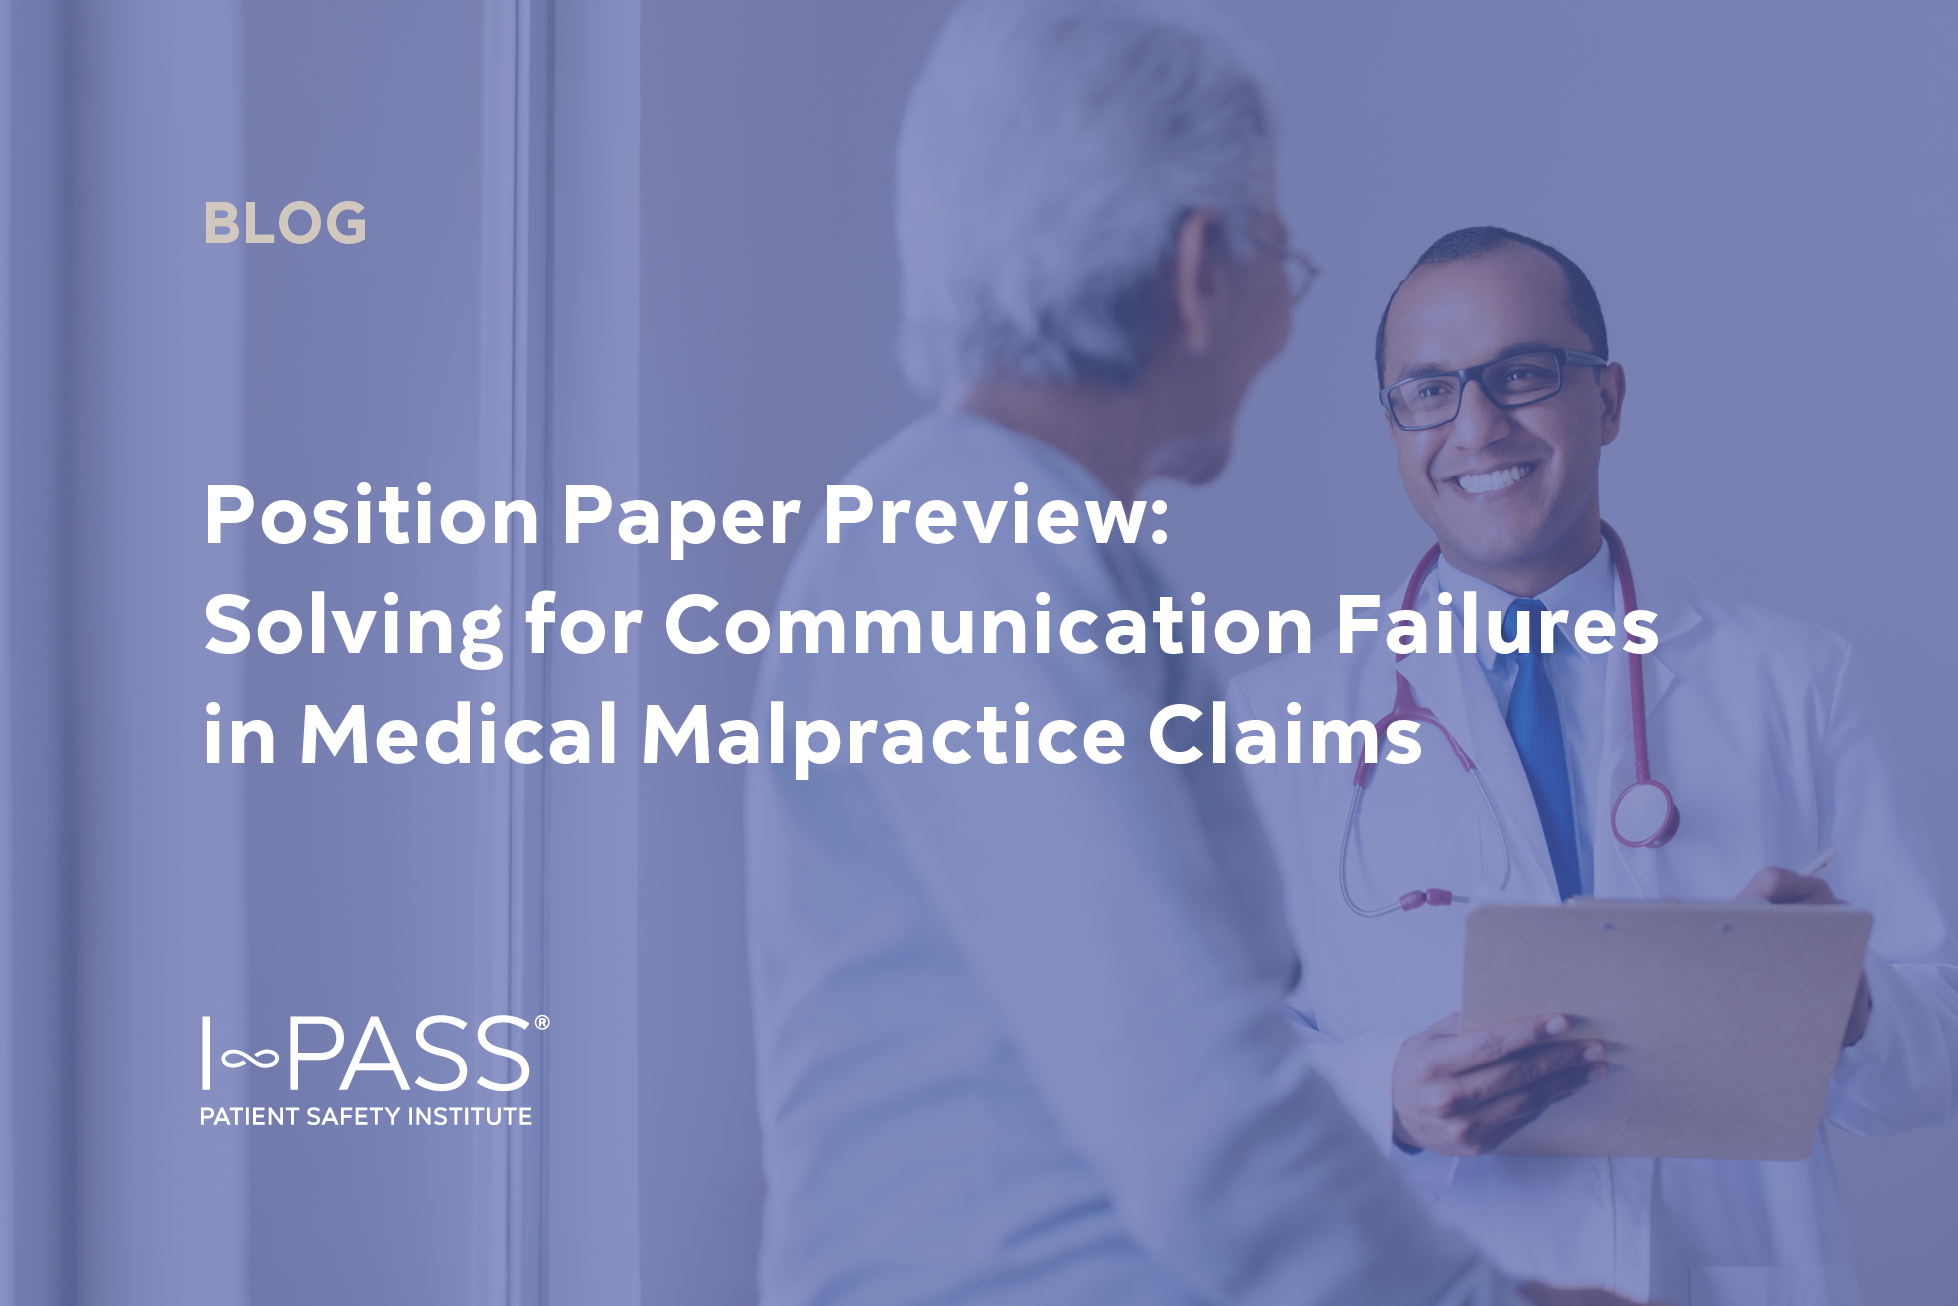 Position Paper Preview: Solving for Communication Failures in Medical Malpractice Claims